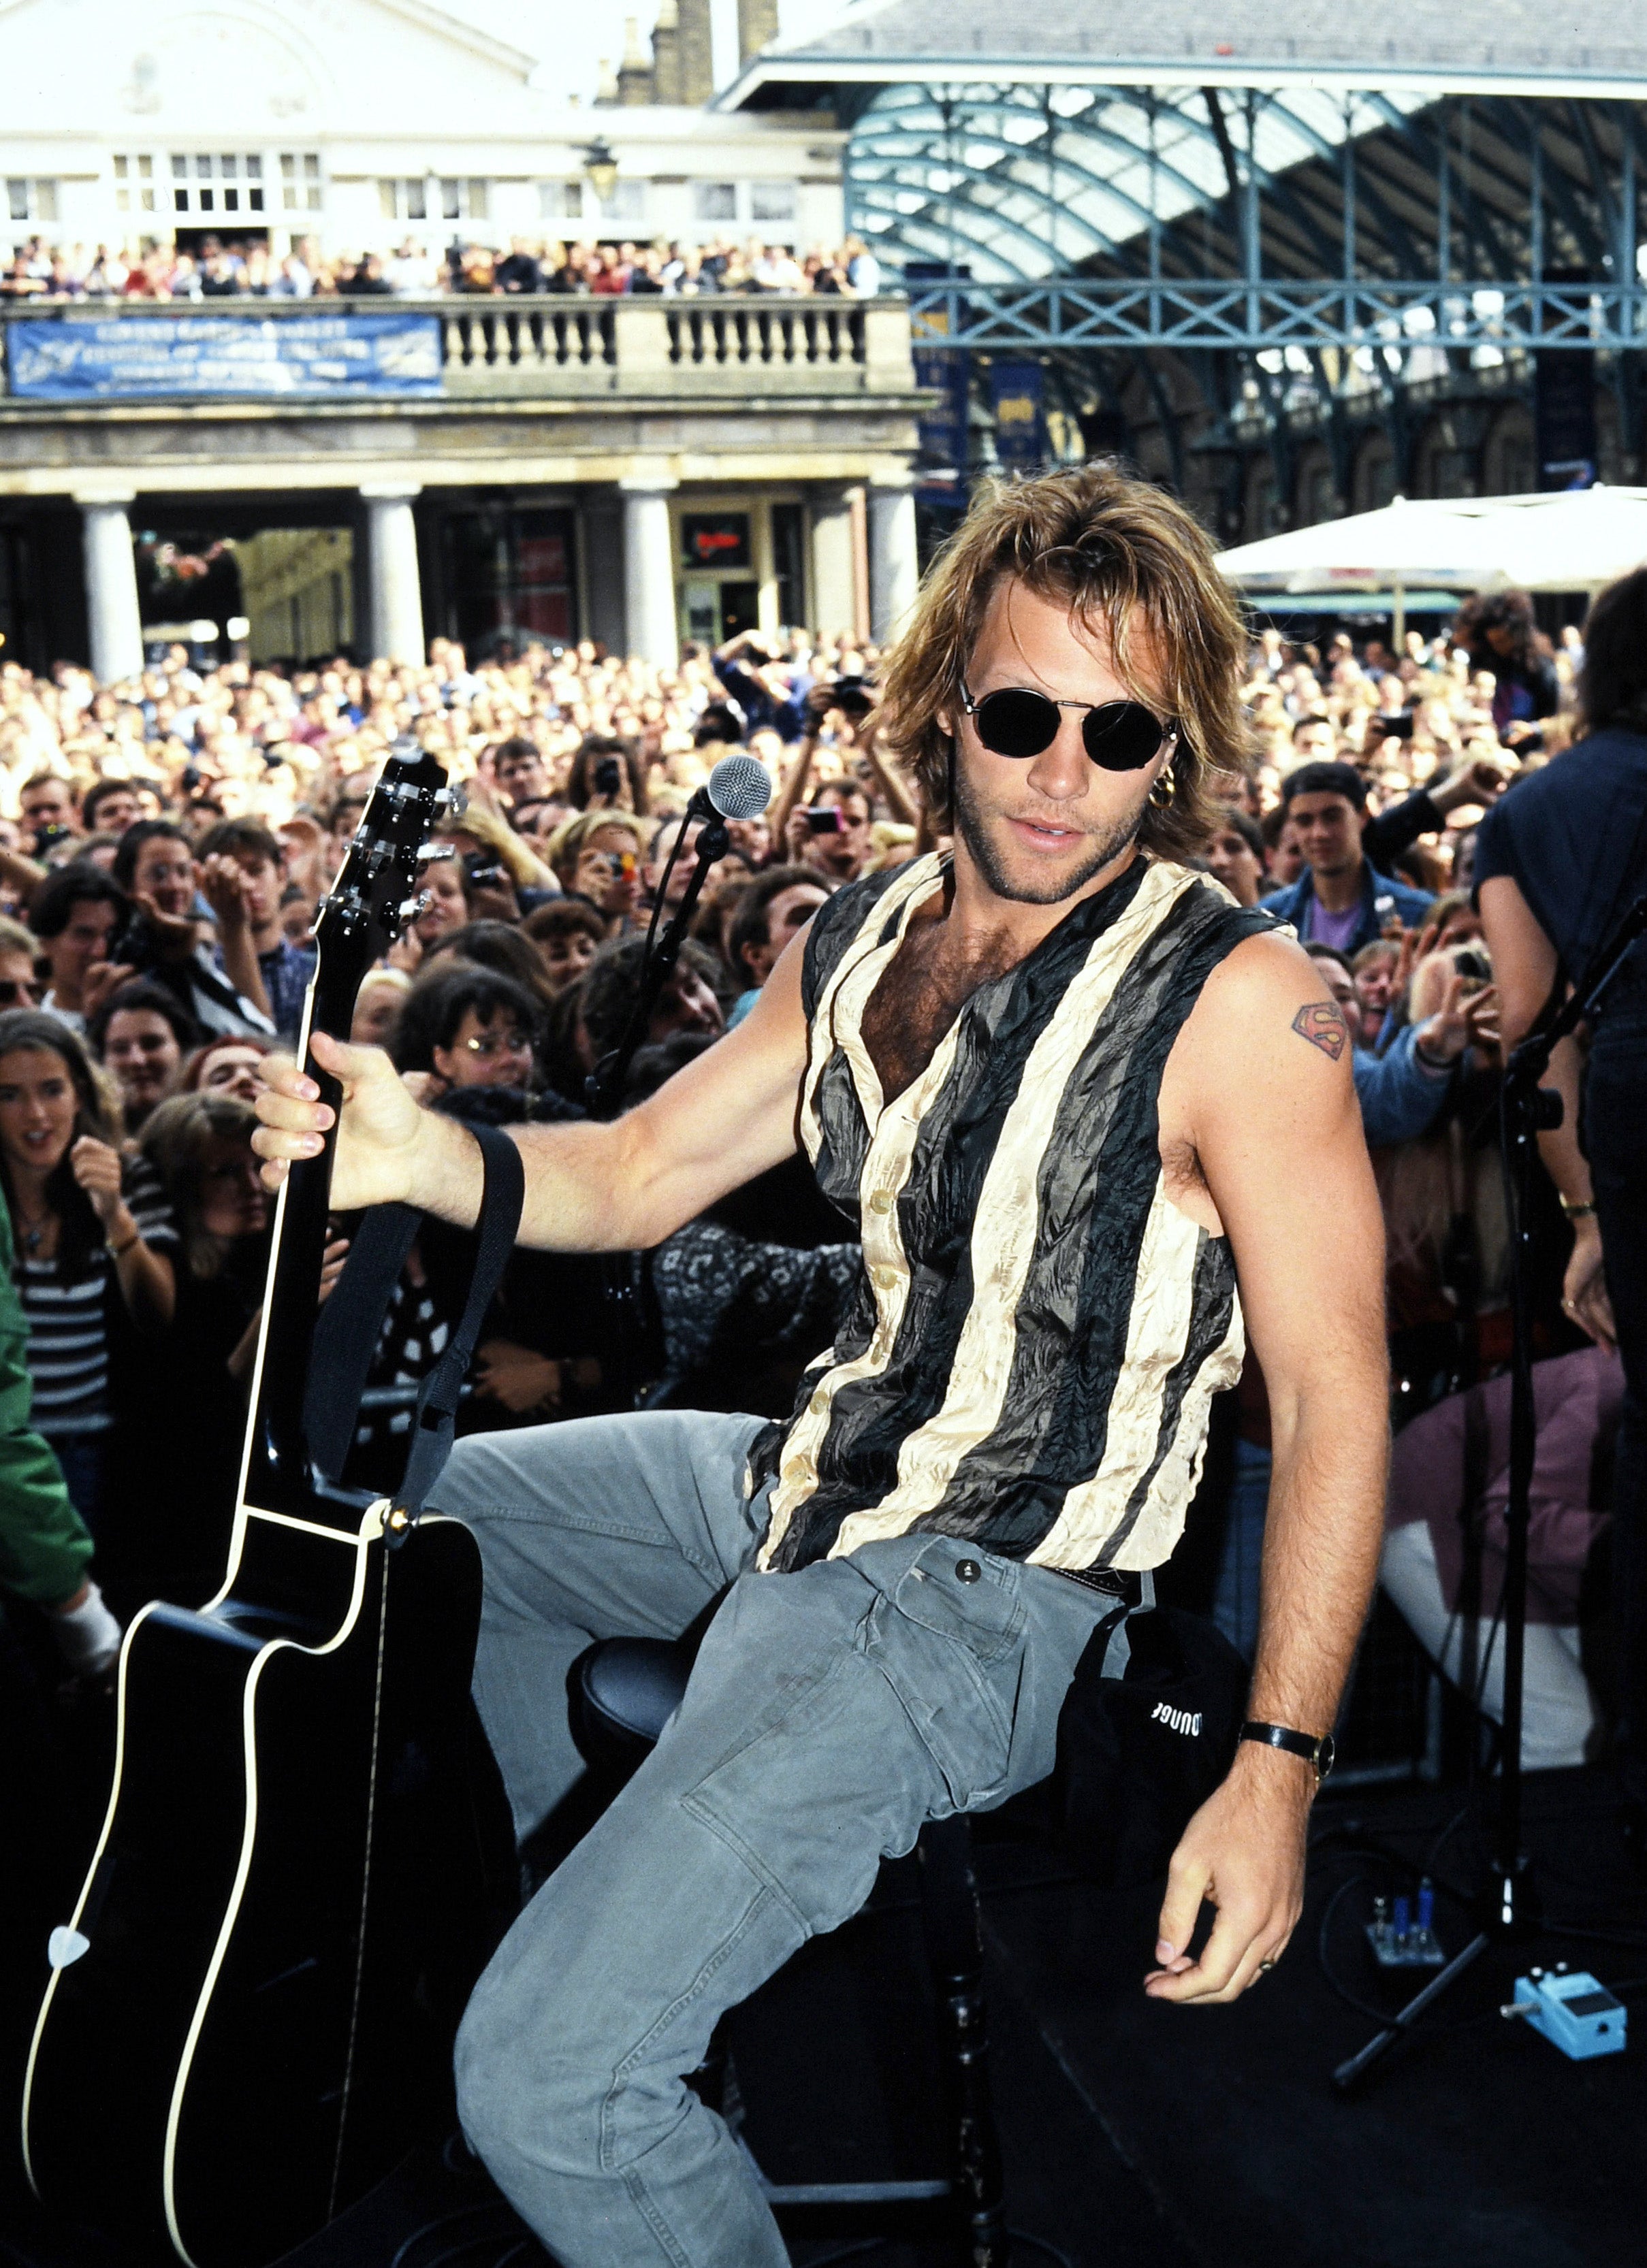 Jon Bon Jovi performs to a throng of fans in Covent Garden, London in 1994